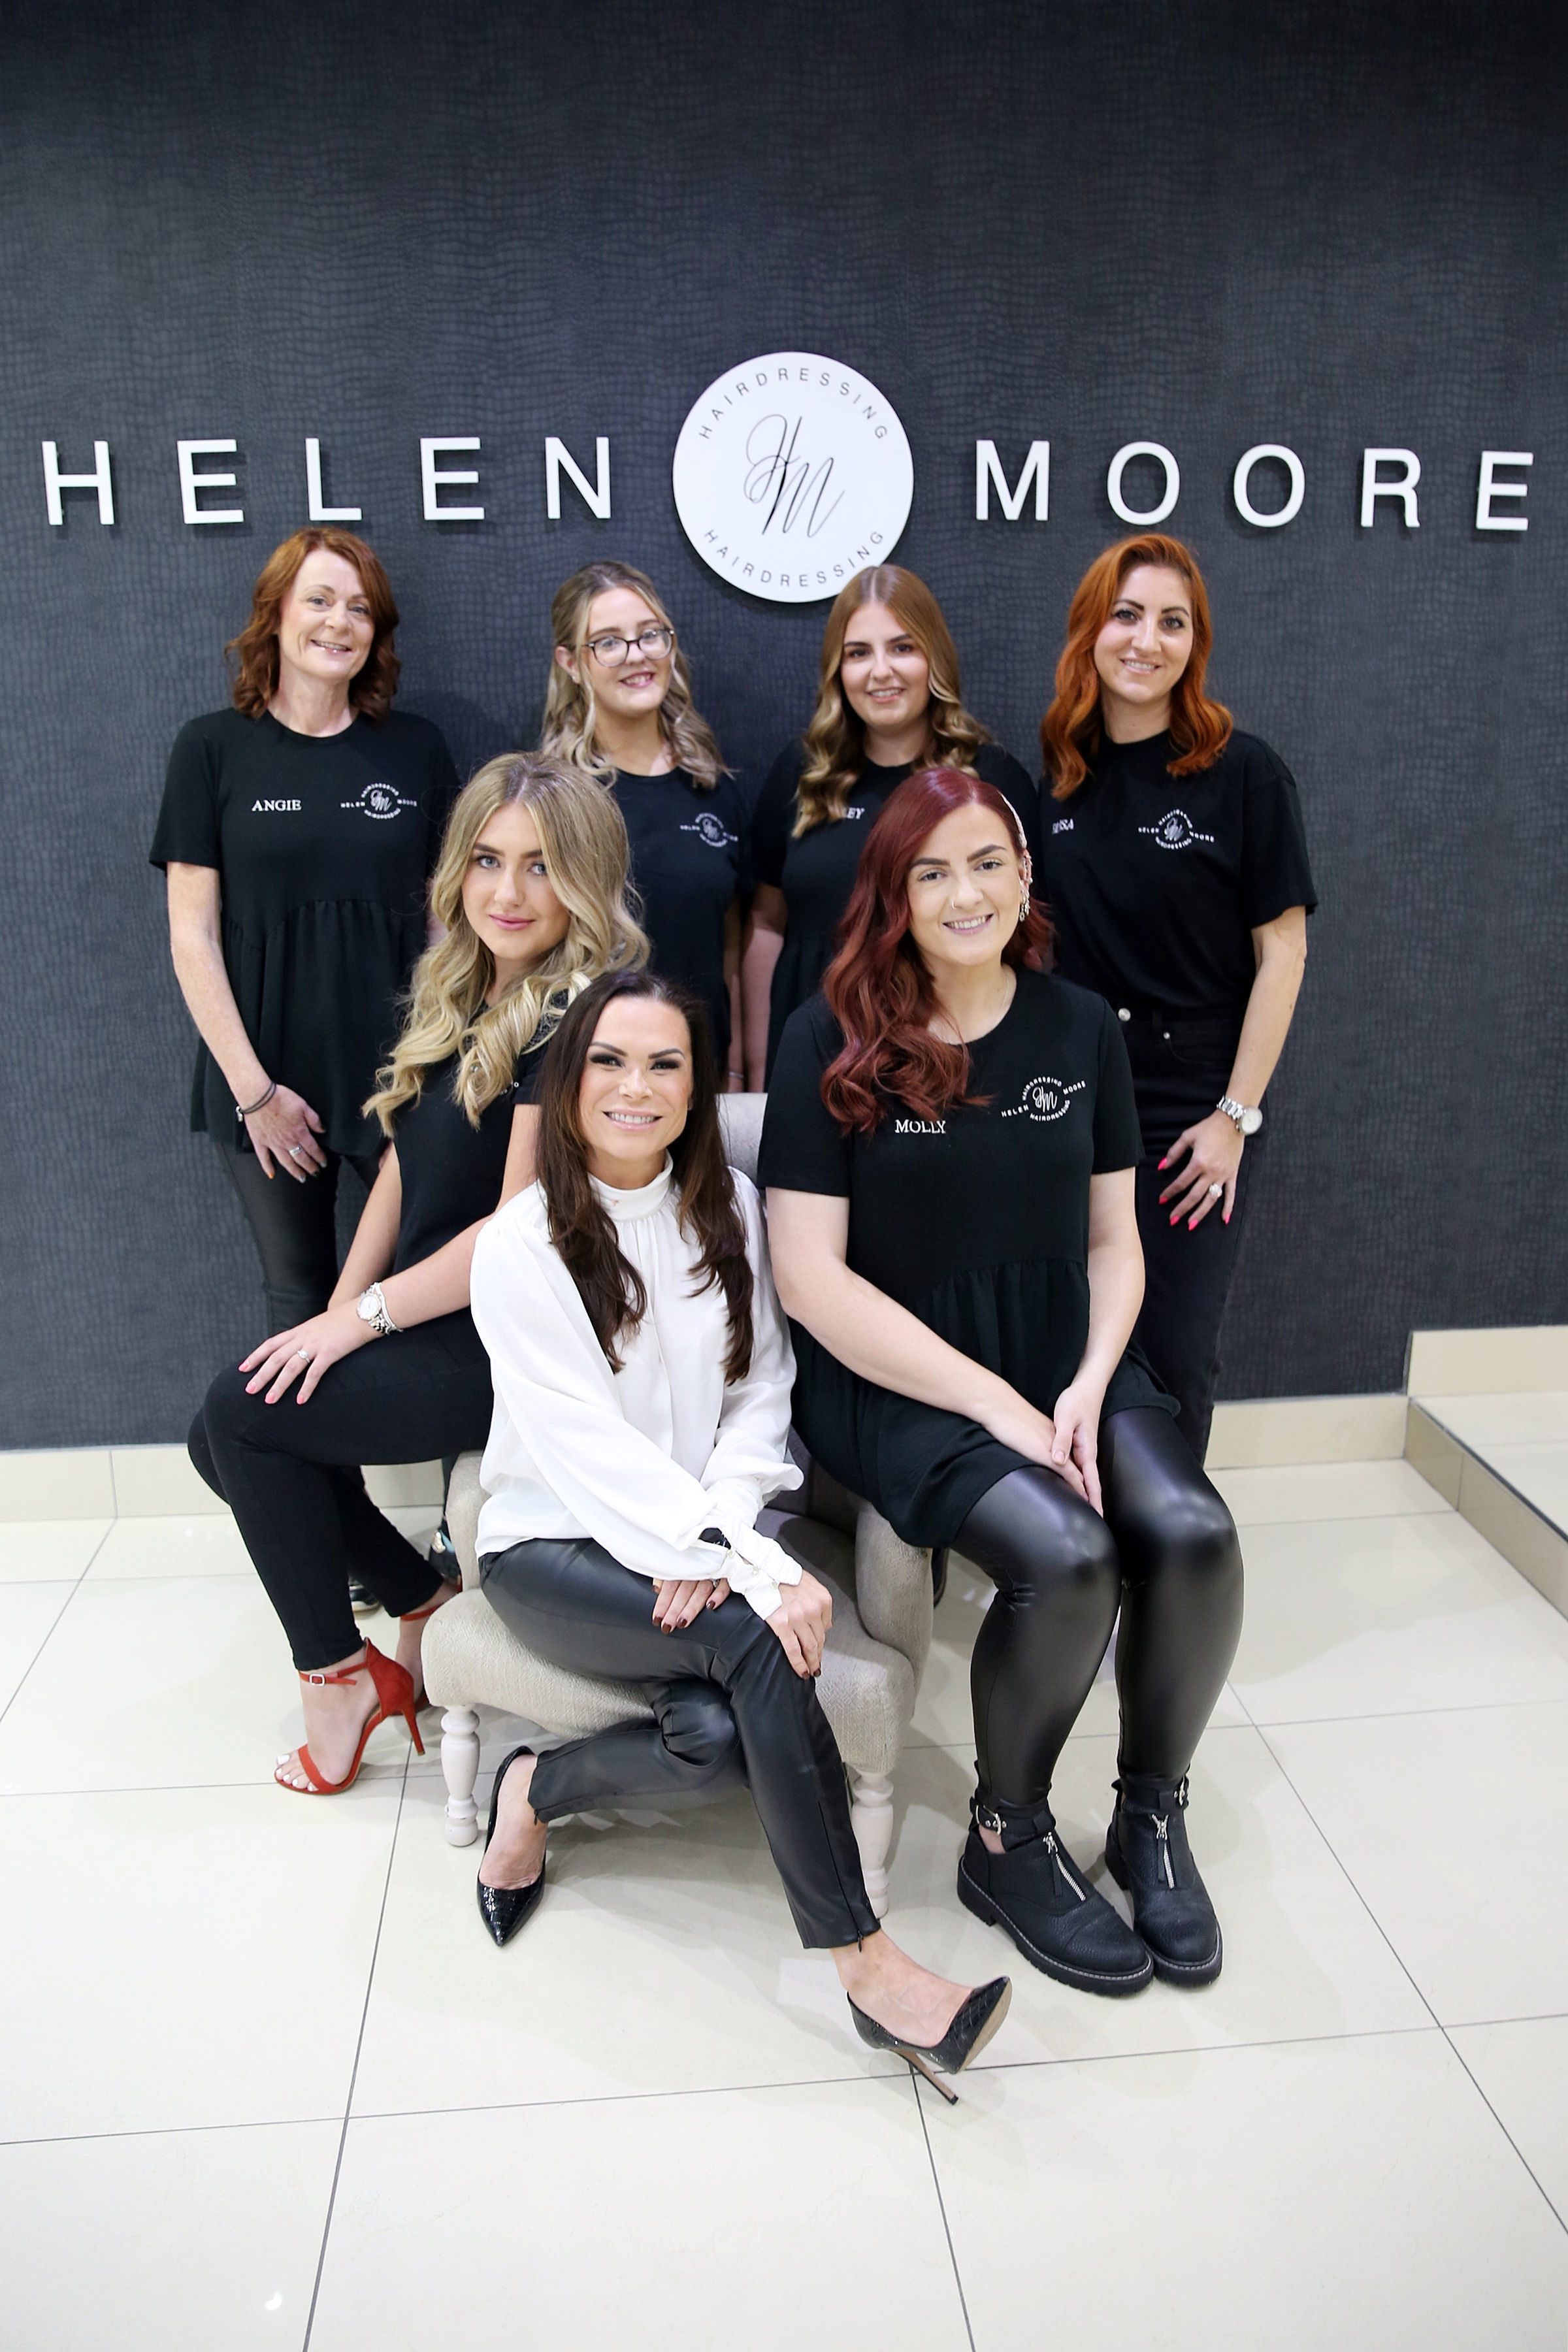 Helen and her hard-working team